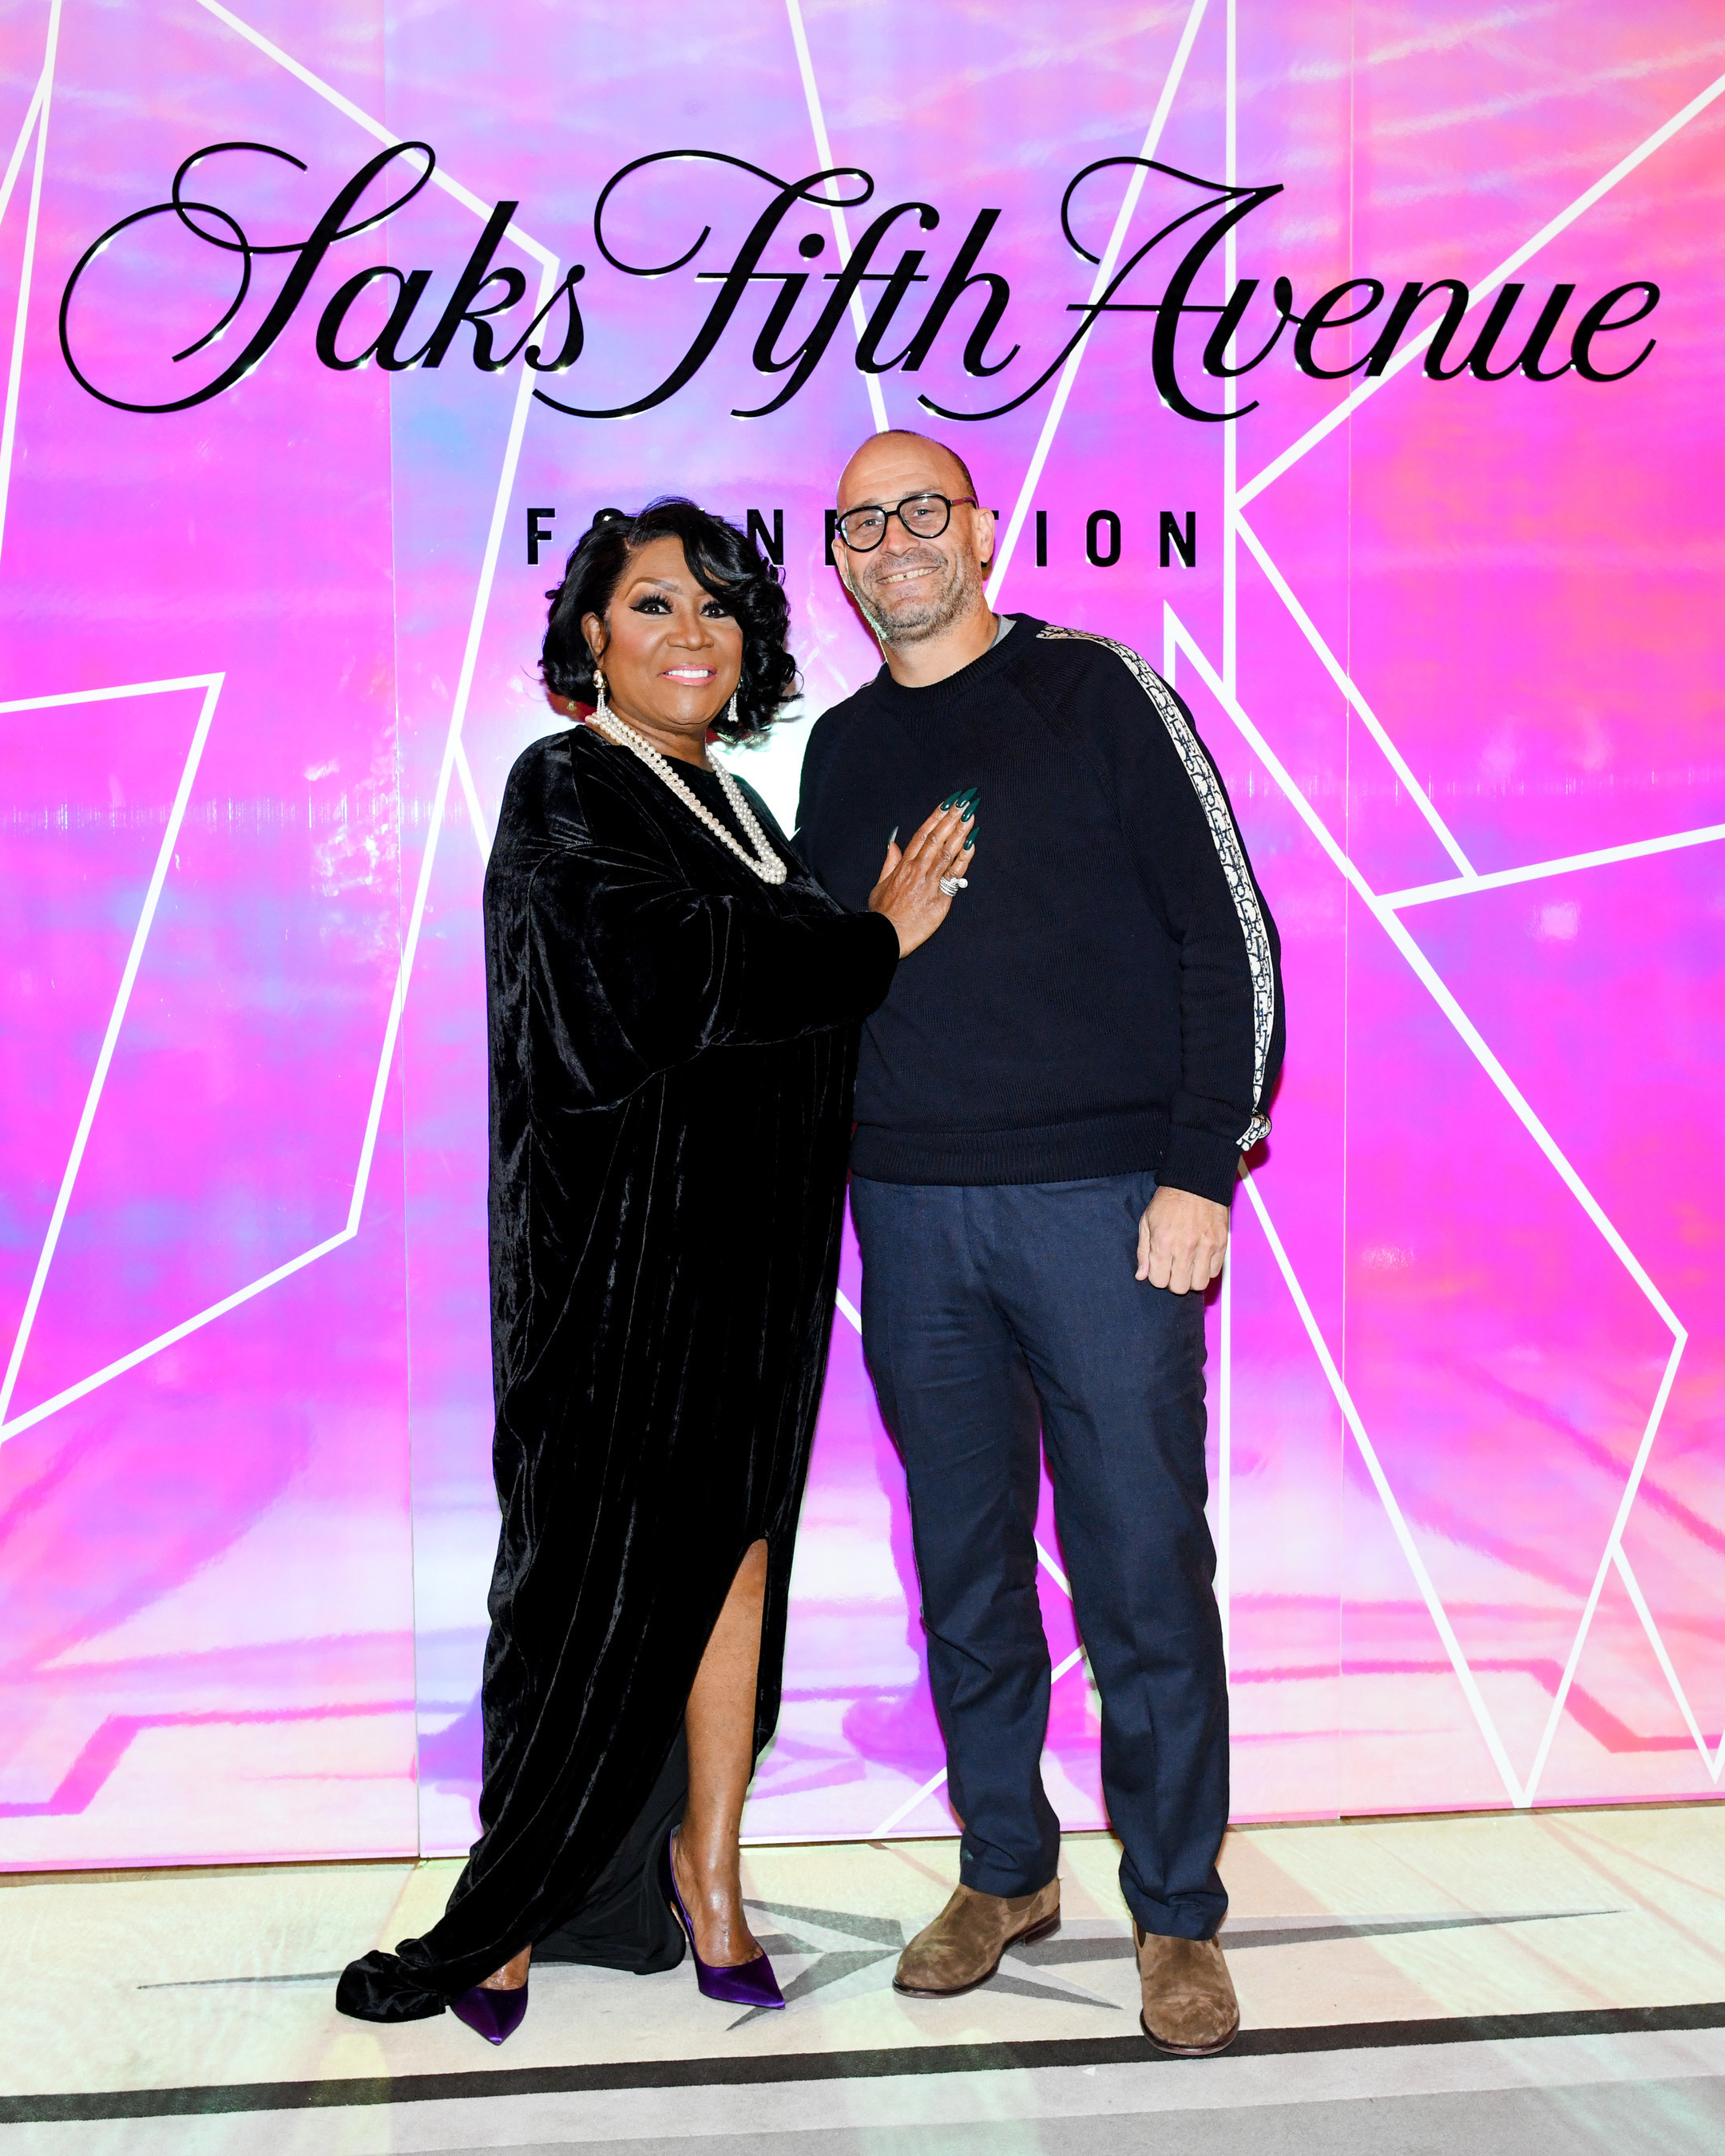 Saks Fifth Avenue's Lackluster Reopening Points to Signs of Struggle